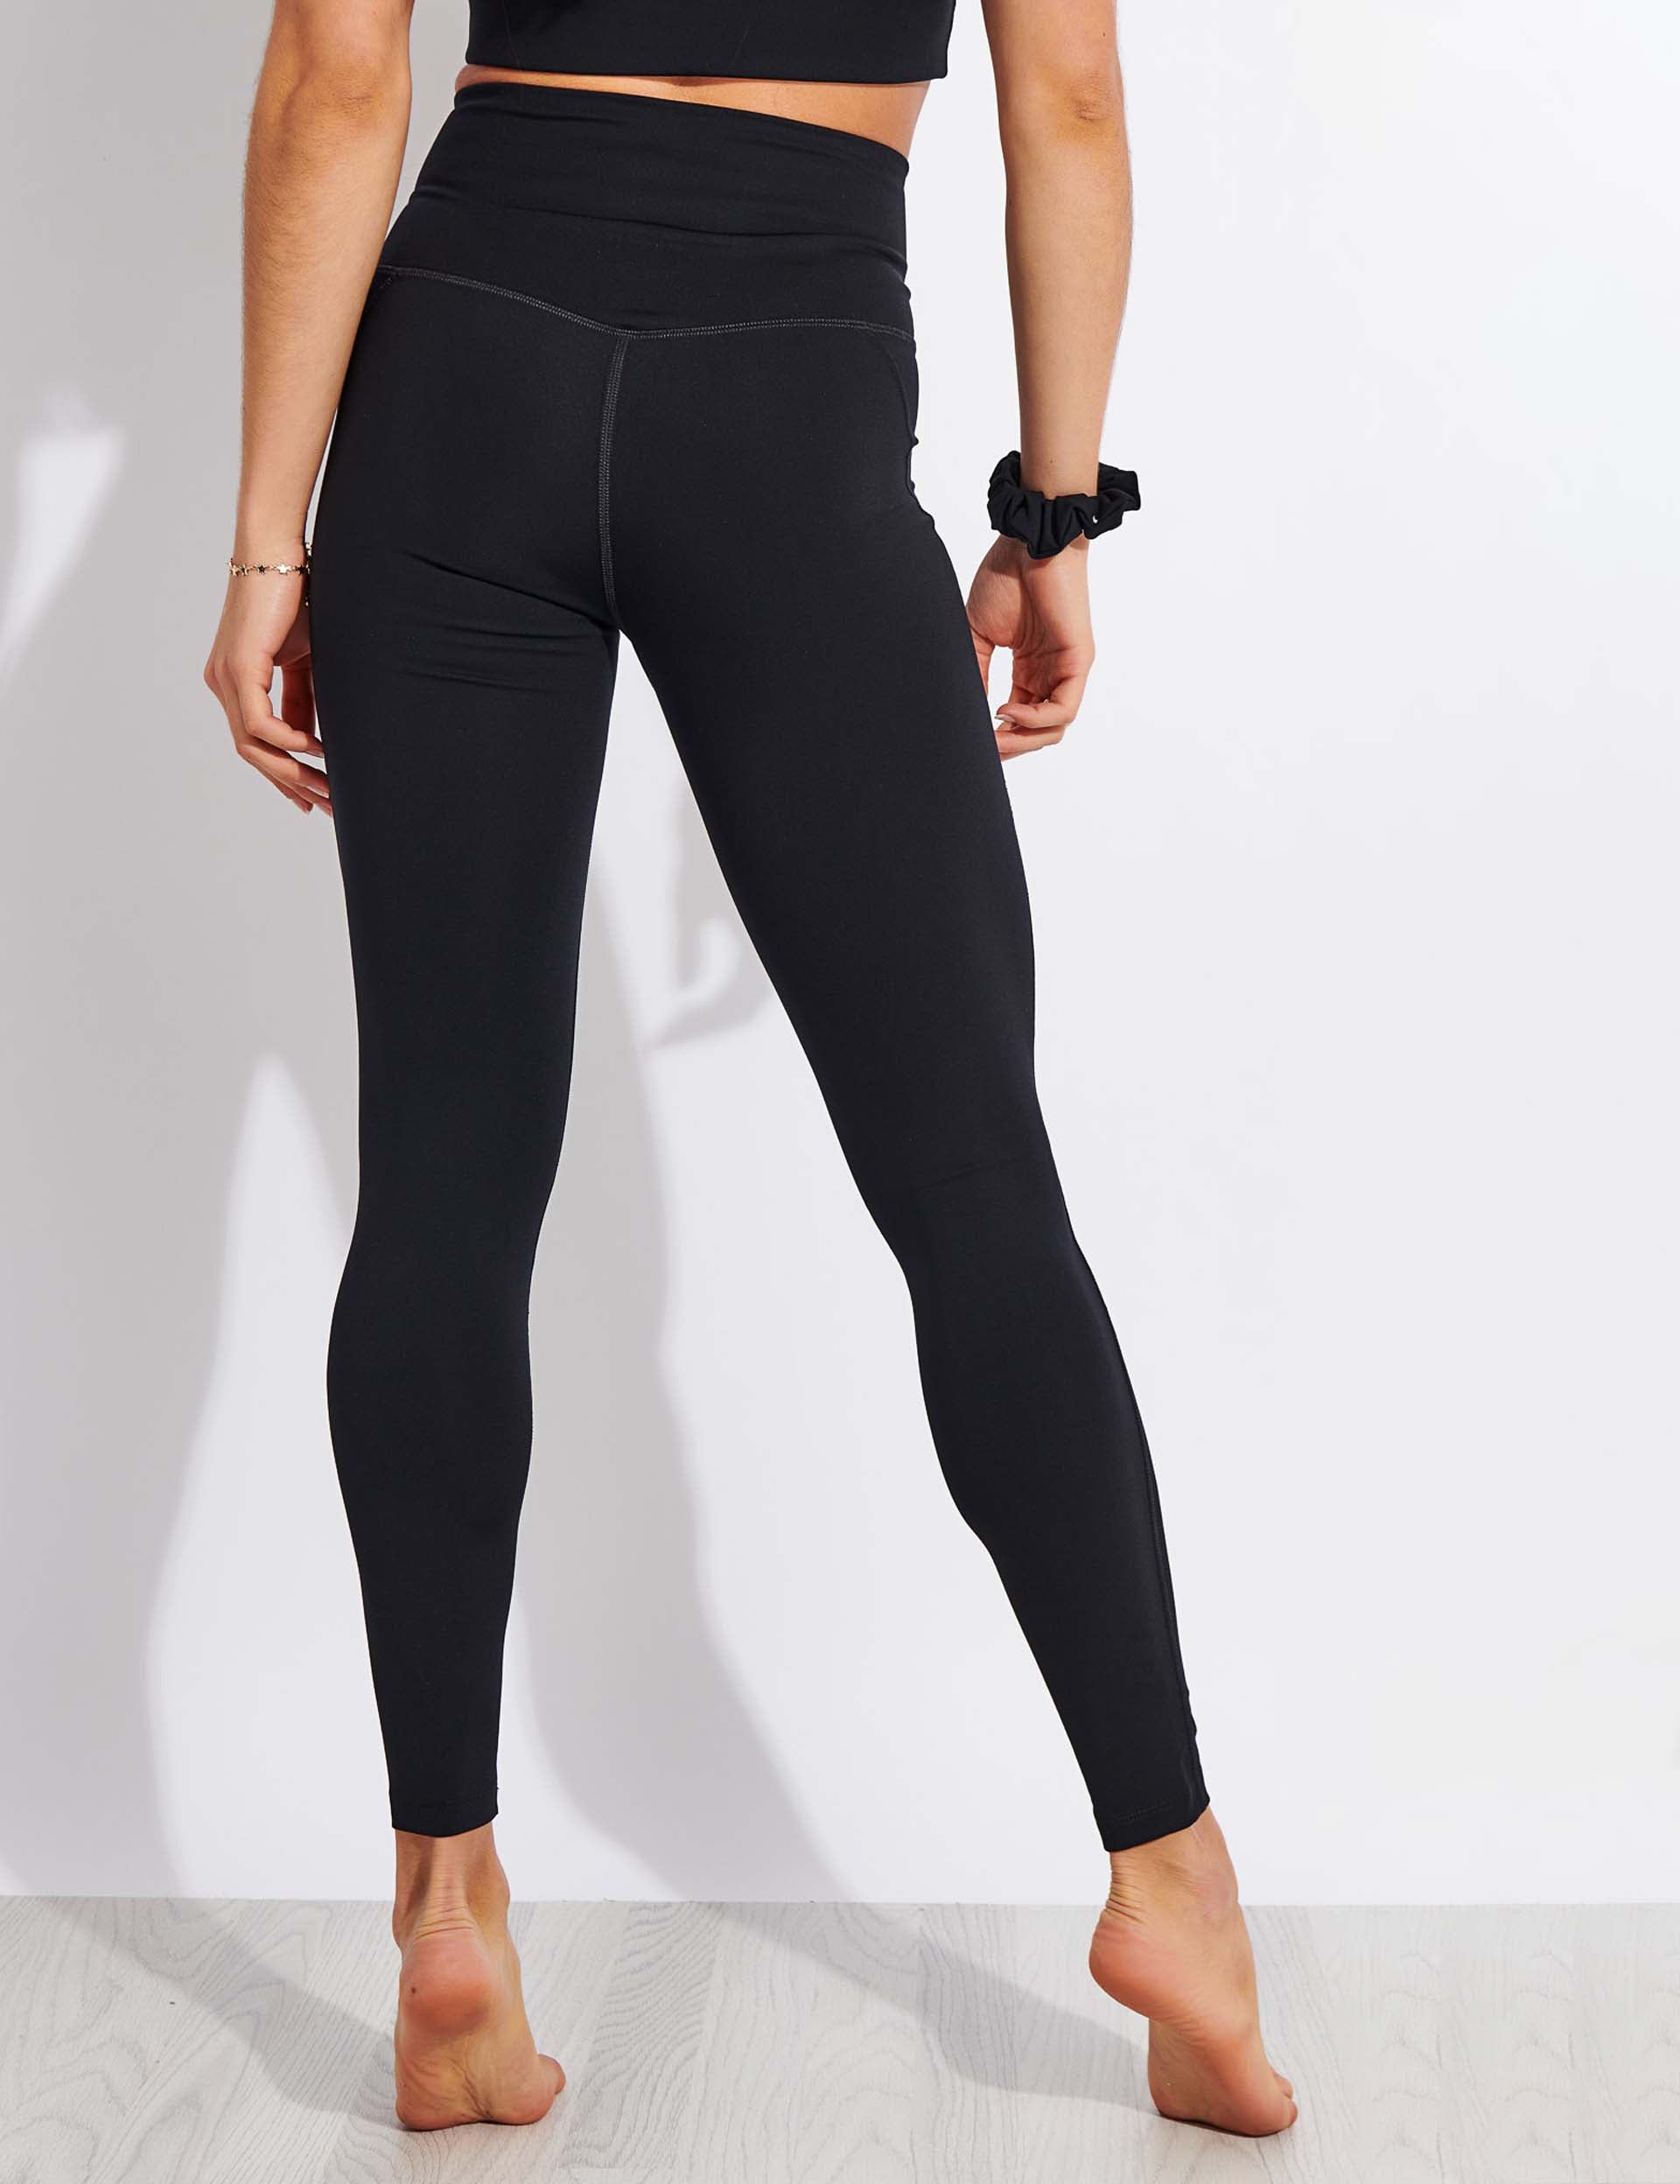 High Waisted Leggings for Women Athletic Workout Out Fitness